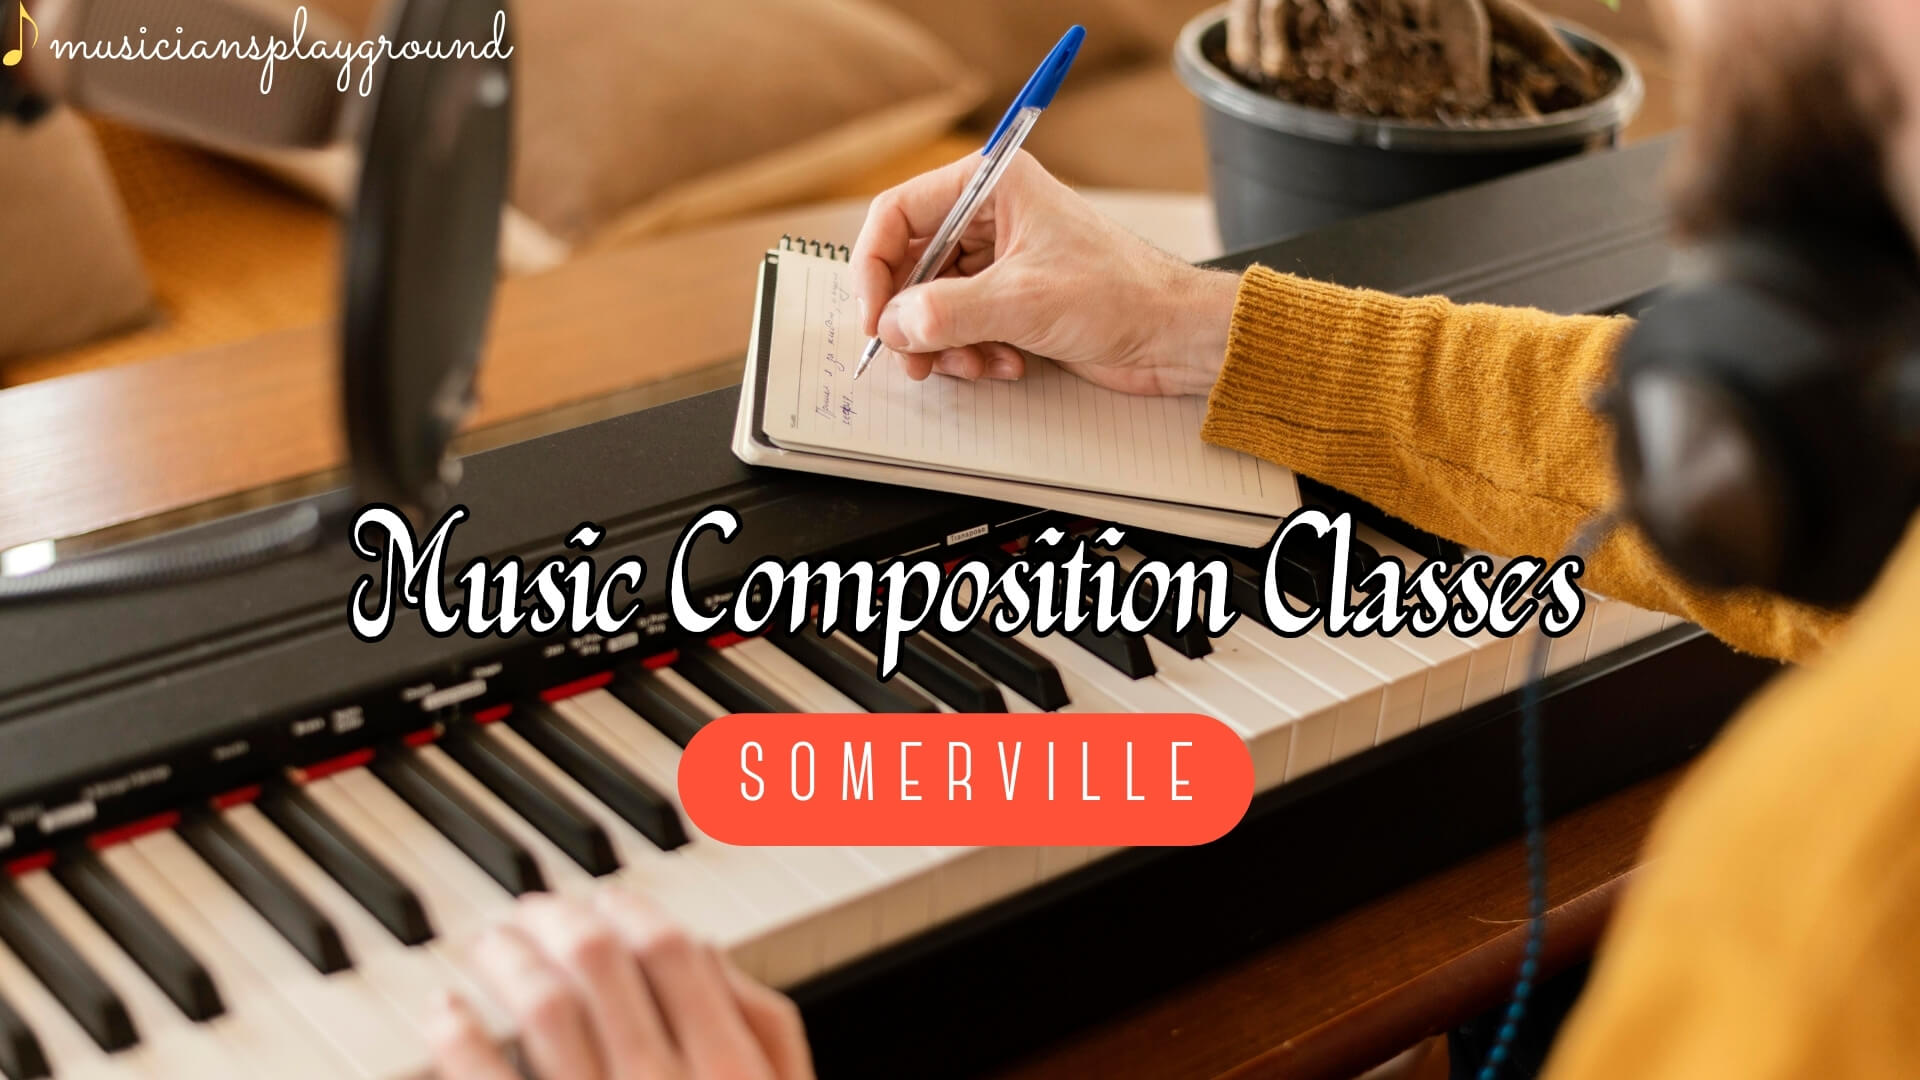 Somerville Music Composition Classes: Unlock Your Creativity at Musicians Playground